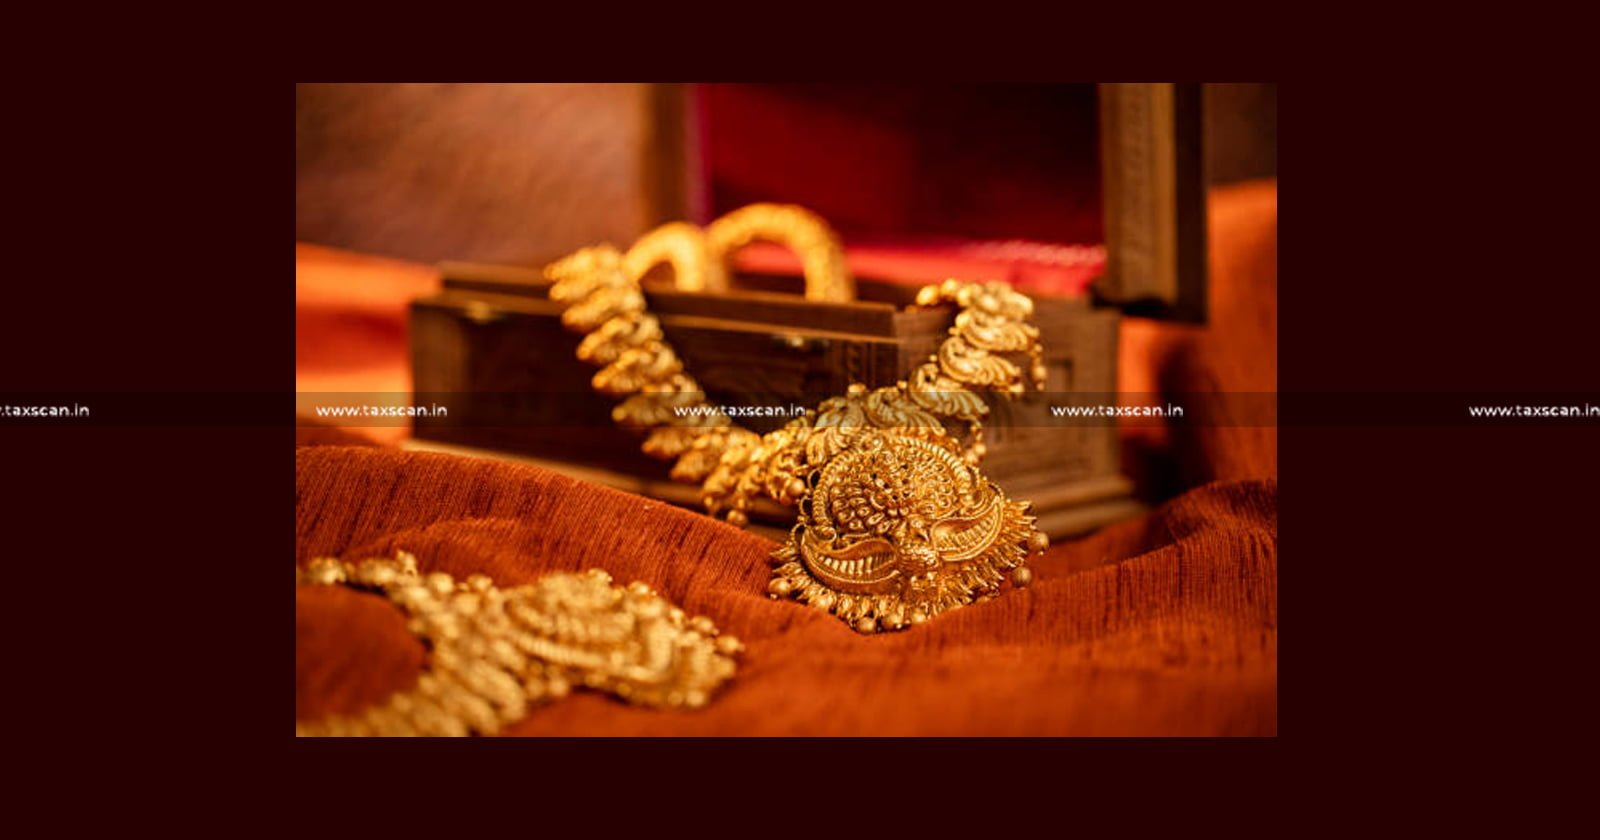 GST - Second Hand Jewellery - Second Hand Gold GST - Purchase Selling Price Difference - Melting Second hand Gold Jewellery - AAR - Gold Jewellery - No GST on Margin Difference - Purchase-Sale - taxscan